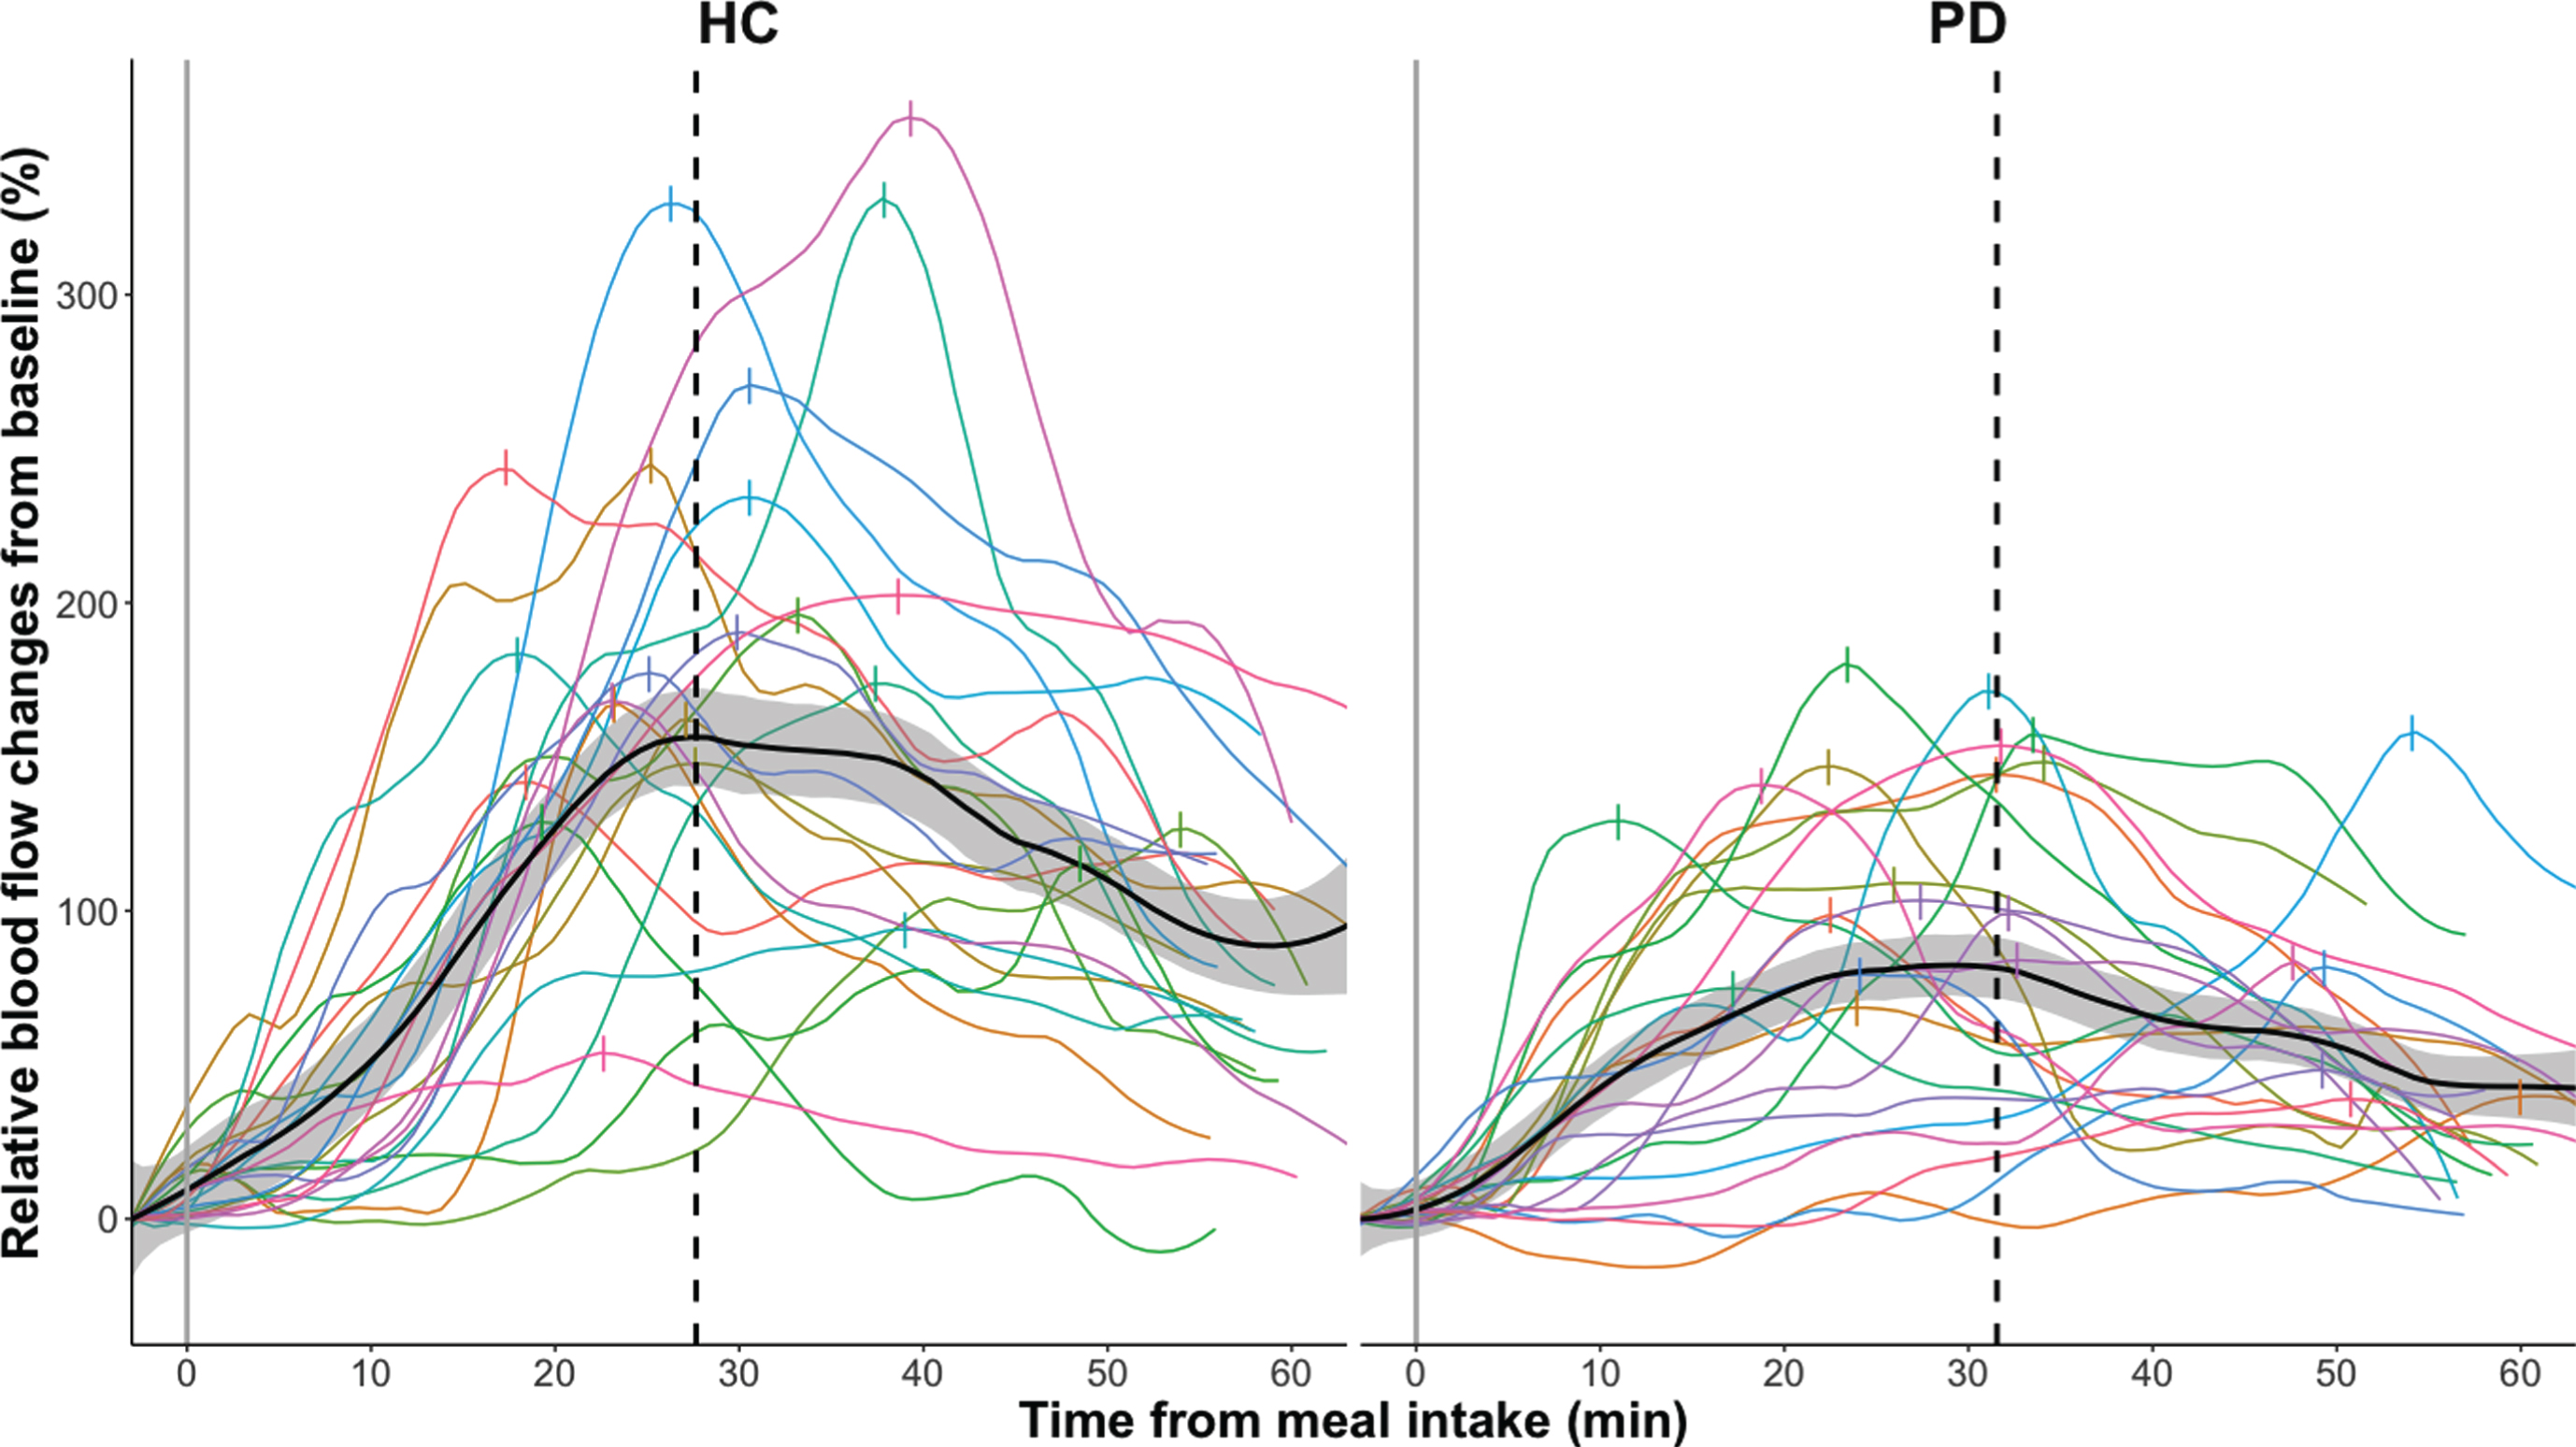 Relative smoothed postprandial superior mesenteric artery blood flow changes in healthy controls (HC) and participants with Parkinson’s disease (PD). Relative blood flow changes from baseline are calculated as (BF –Baseline BF) * Baseline BF * 100 %. Curves are fitted to the individual time series of blood flow measurements using local polynomial regression fitting with a 25%smoothing span. The black curve with shaded areas marks the mean and standard error for the PD group and the healthy control group, while the vertical dotted line marks the median for the maximal blood flow measurements of each group. The vertical dashes mark the maximal blood flow for each subject.